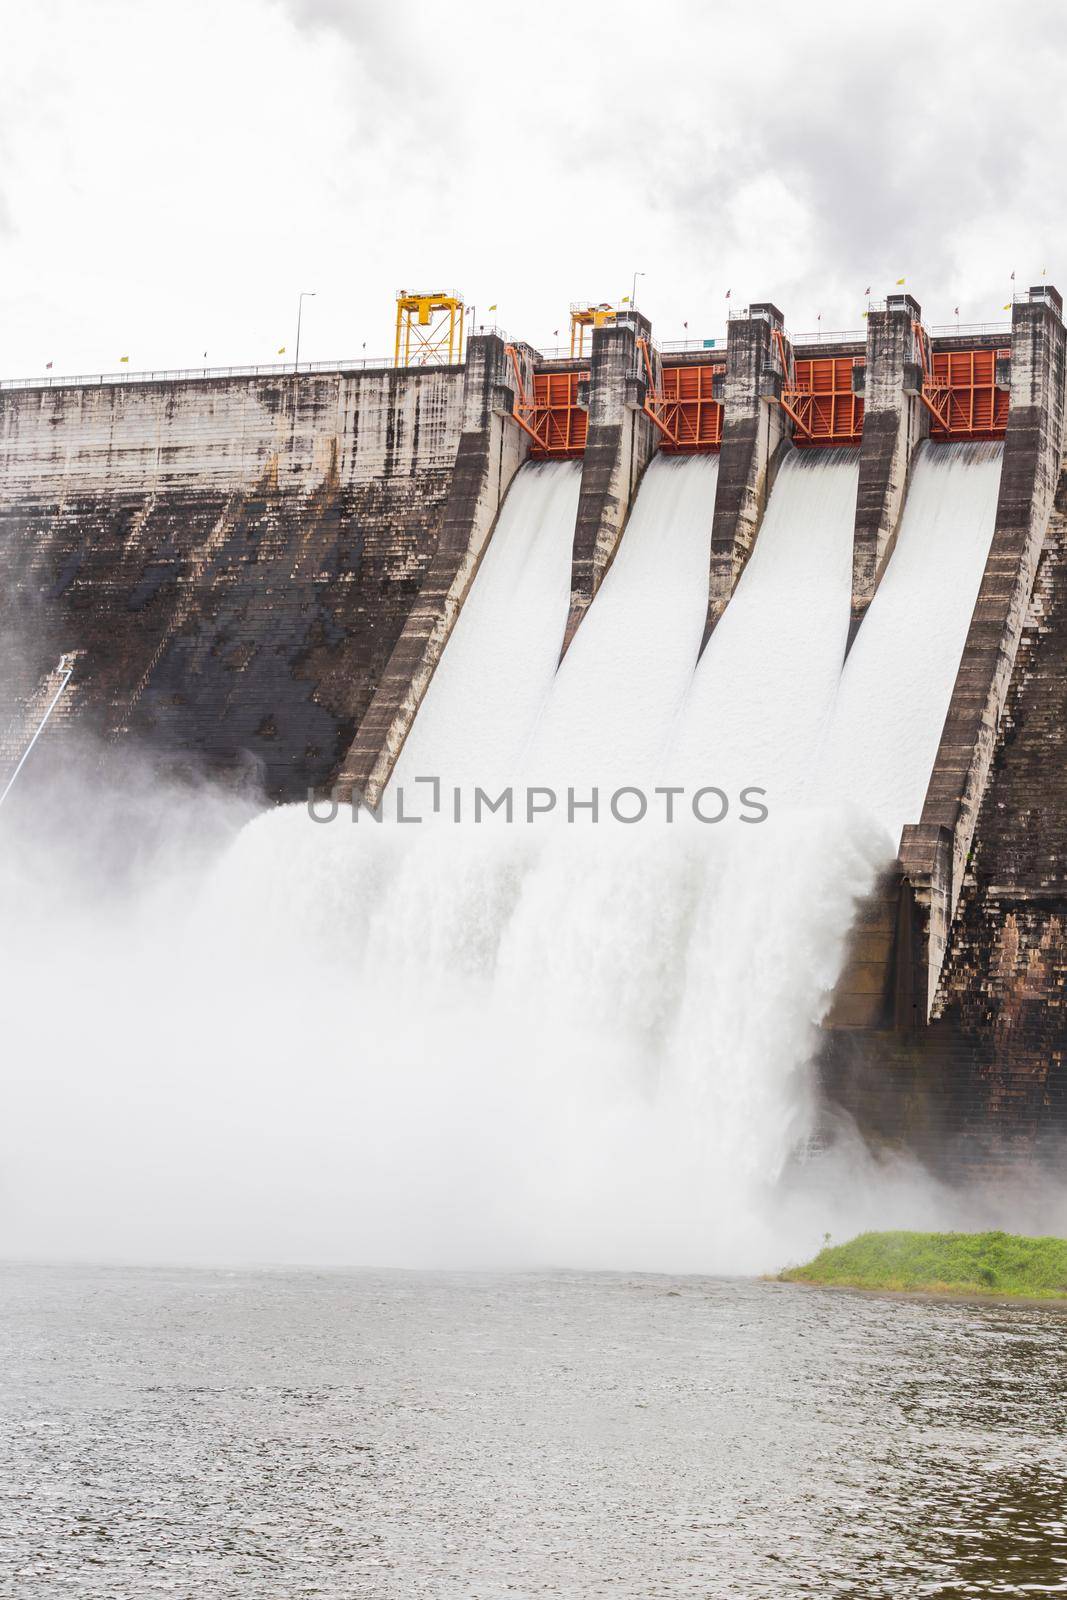 The dam Khun Dan Prakarn Chon is a dam with hydroelectric power plant and irrigation and flood protection in the district of Nakhon Nayok Province , Thailand